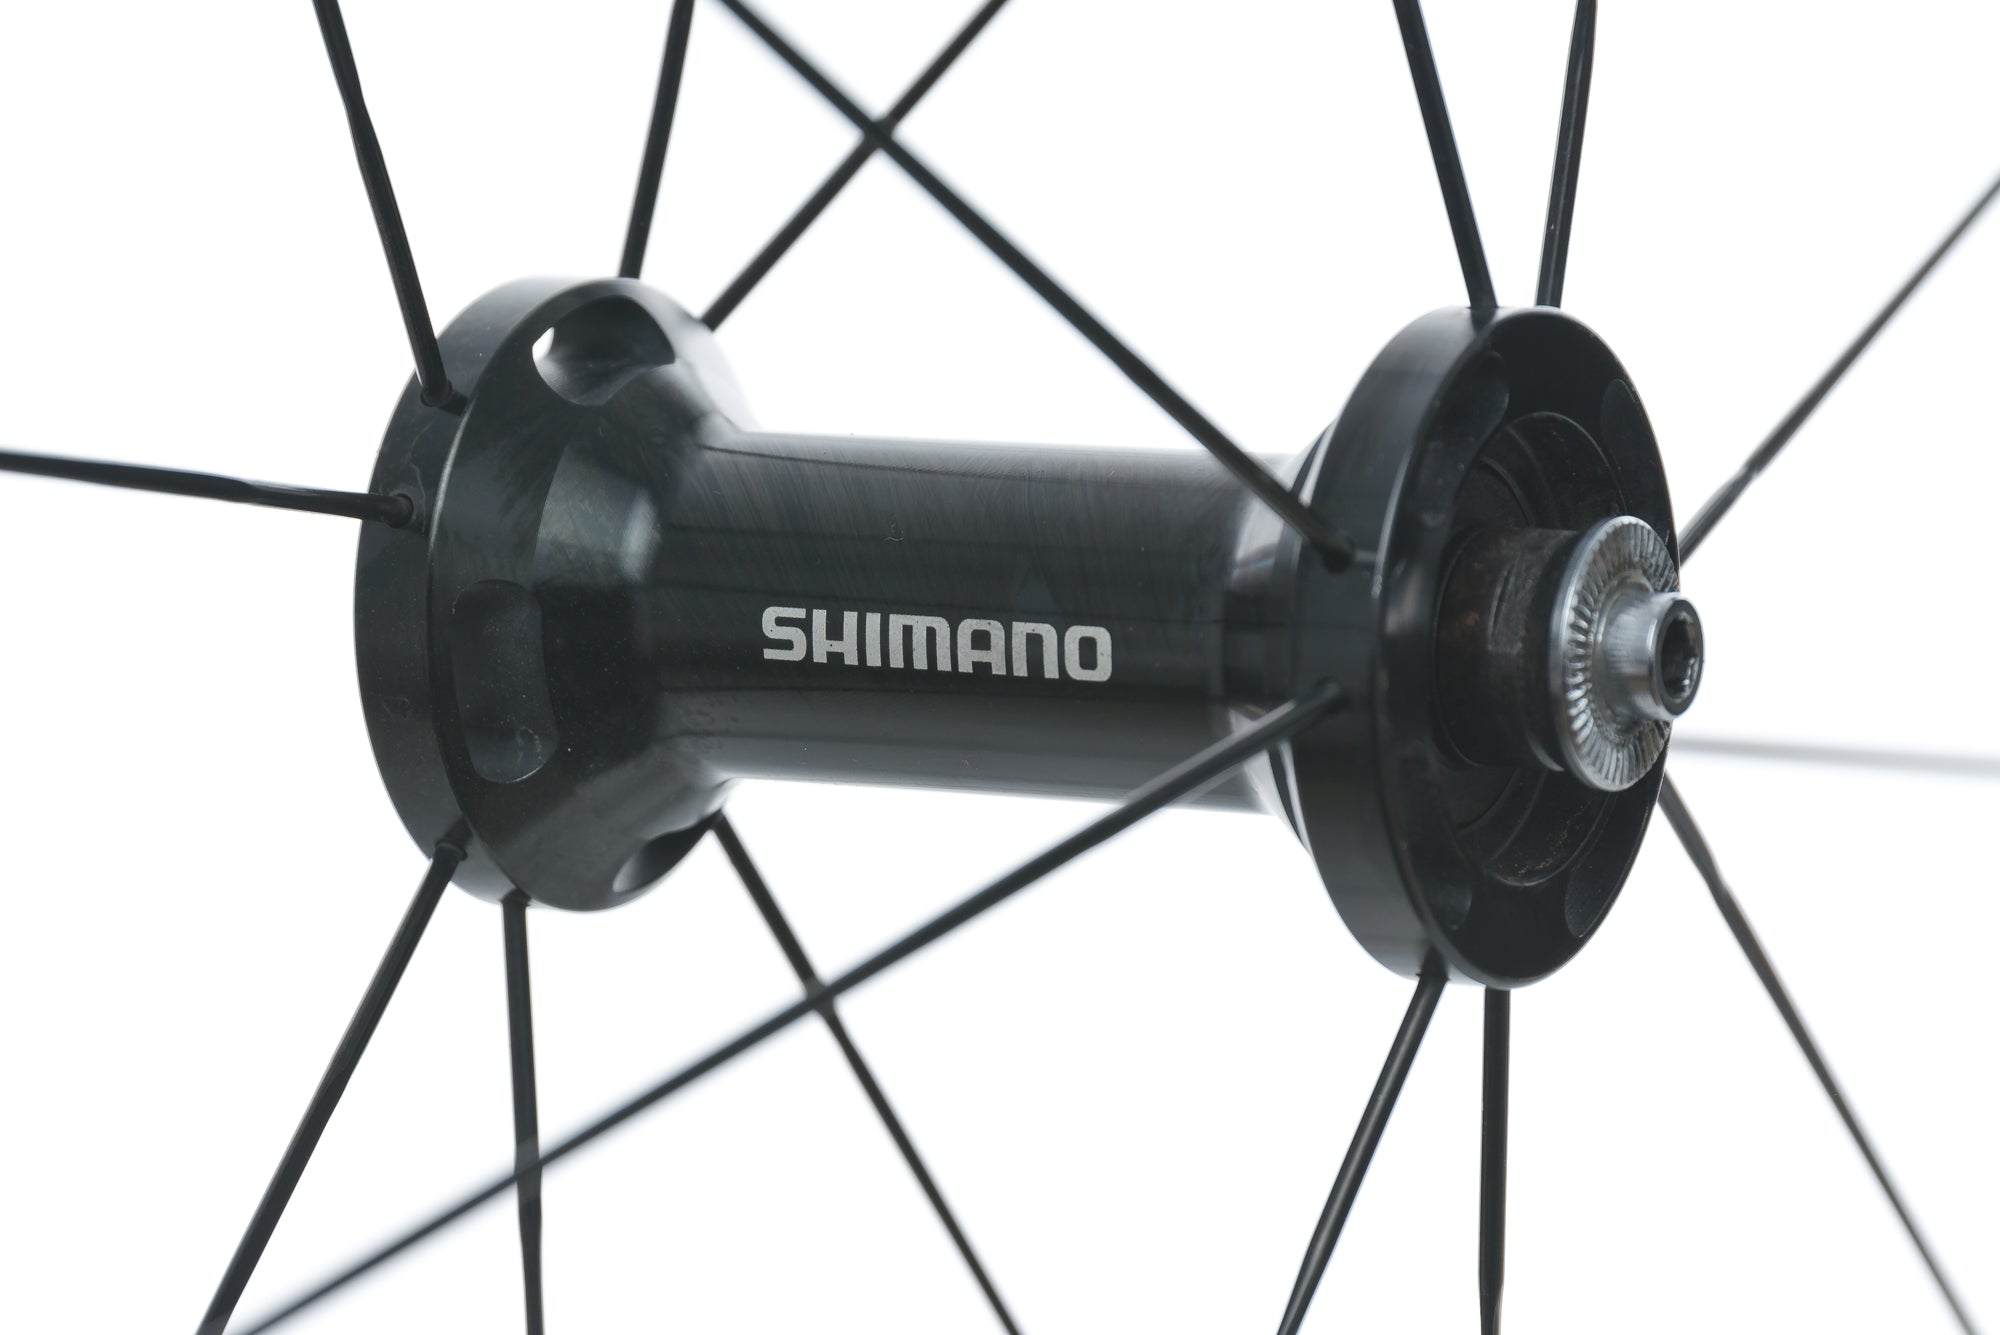 Shimano WH-RS610 Aluminum Clincher 700c Front Wheel sticker